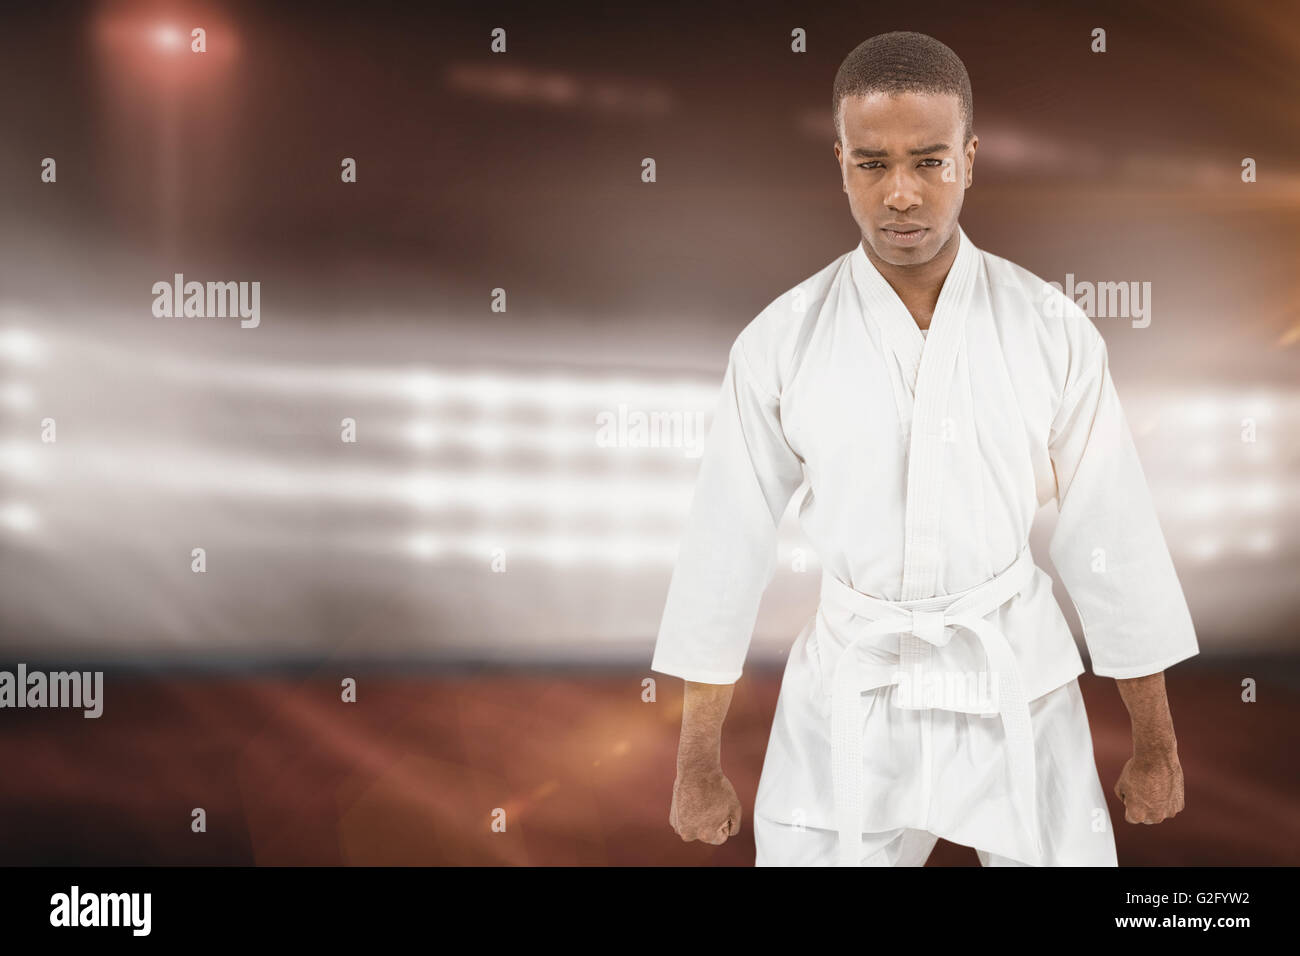 Composite image of front view of karate fighter meditating Stock Photo